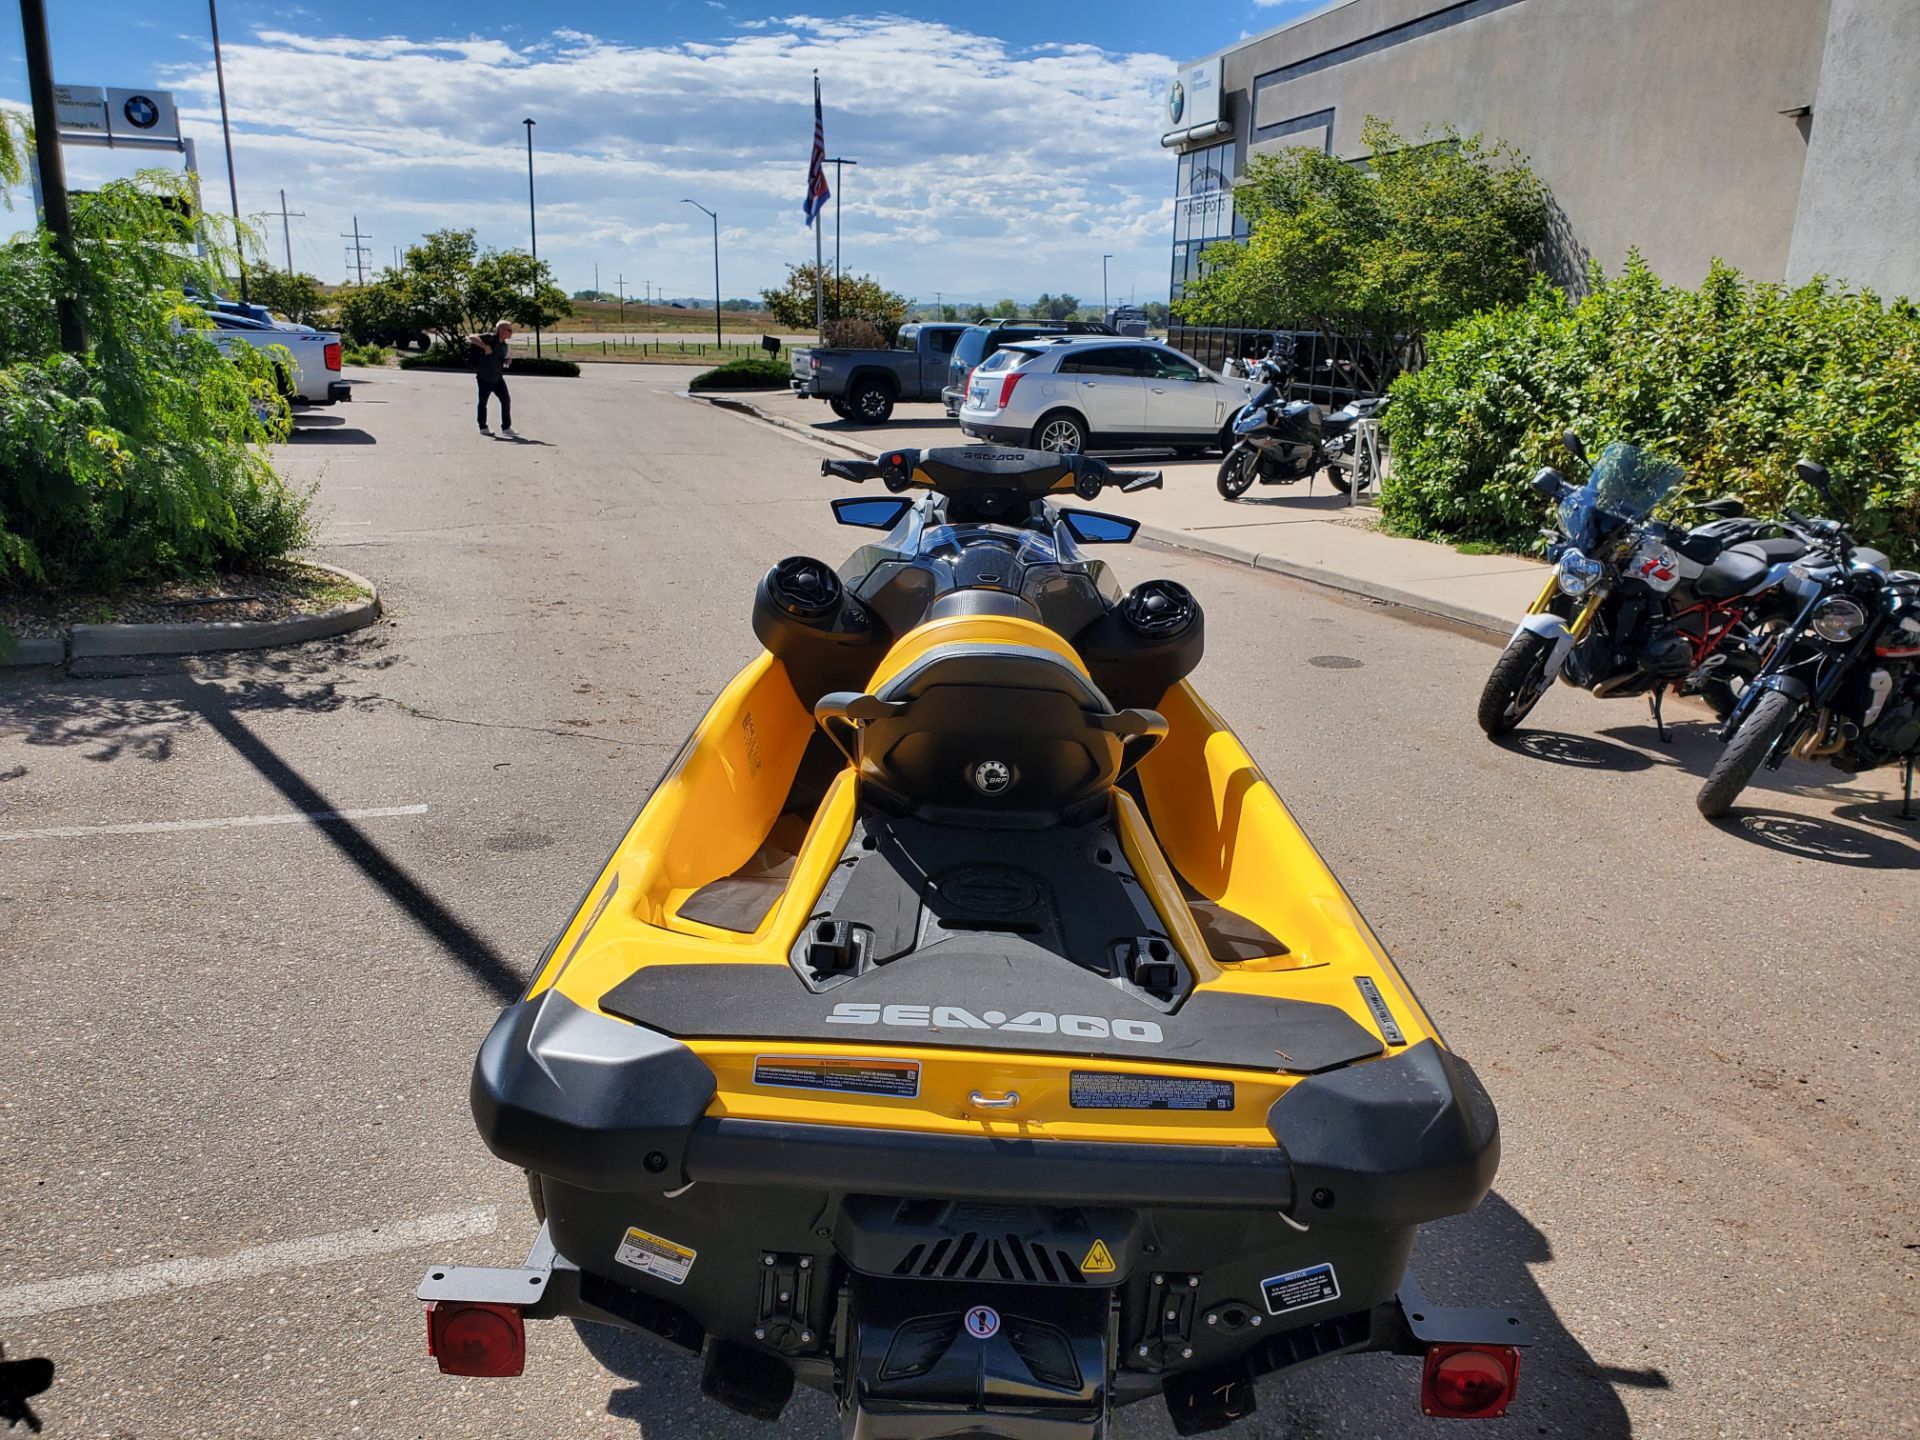 2022 Sea-Doo RXP-X 300 + Tech Package in Fort Collins, Colorado - Photo 5